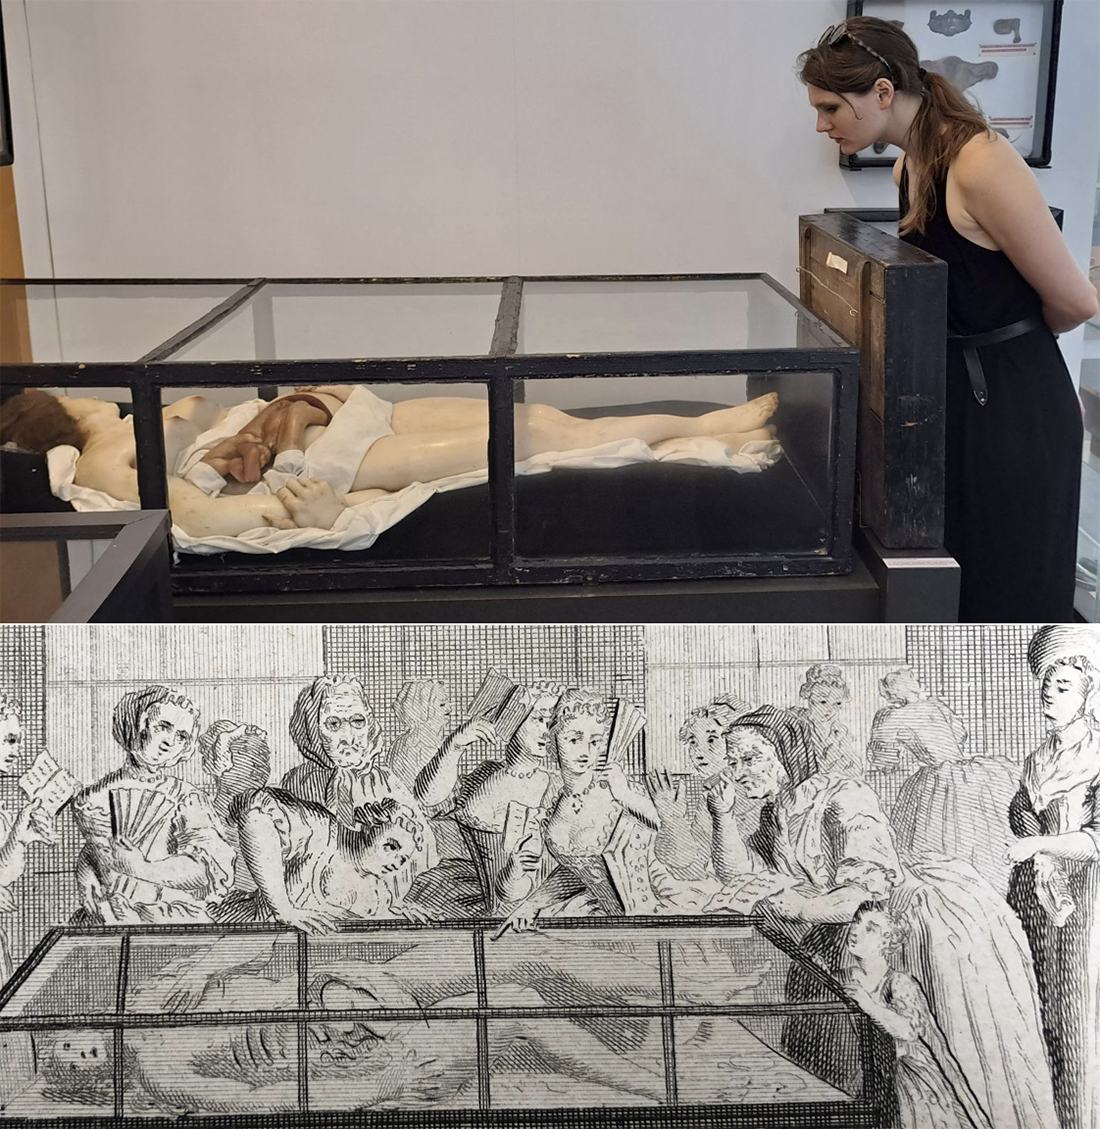 Zoe Copeman looking at display of anatomical model of a woman in a  pose that echoes that of a woman in a 19th-century print looking at a similar model with other women